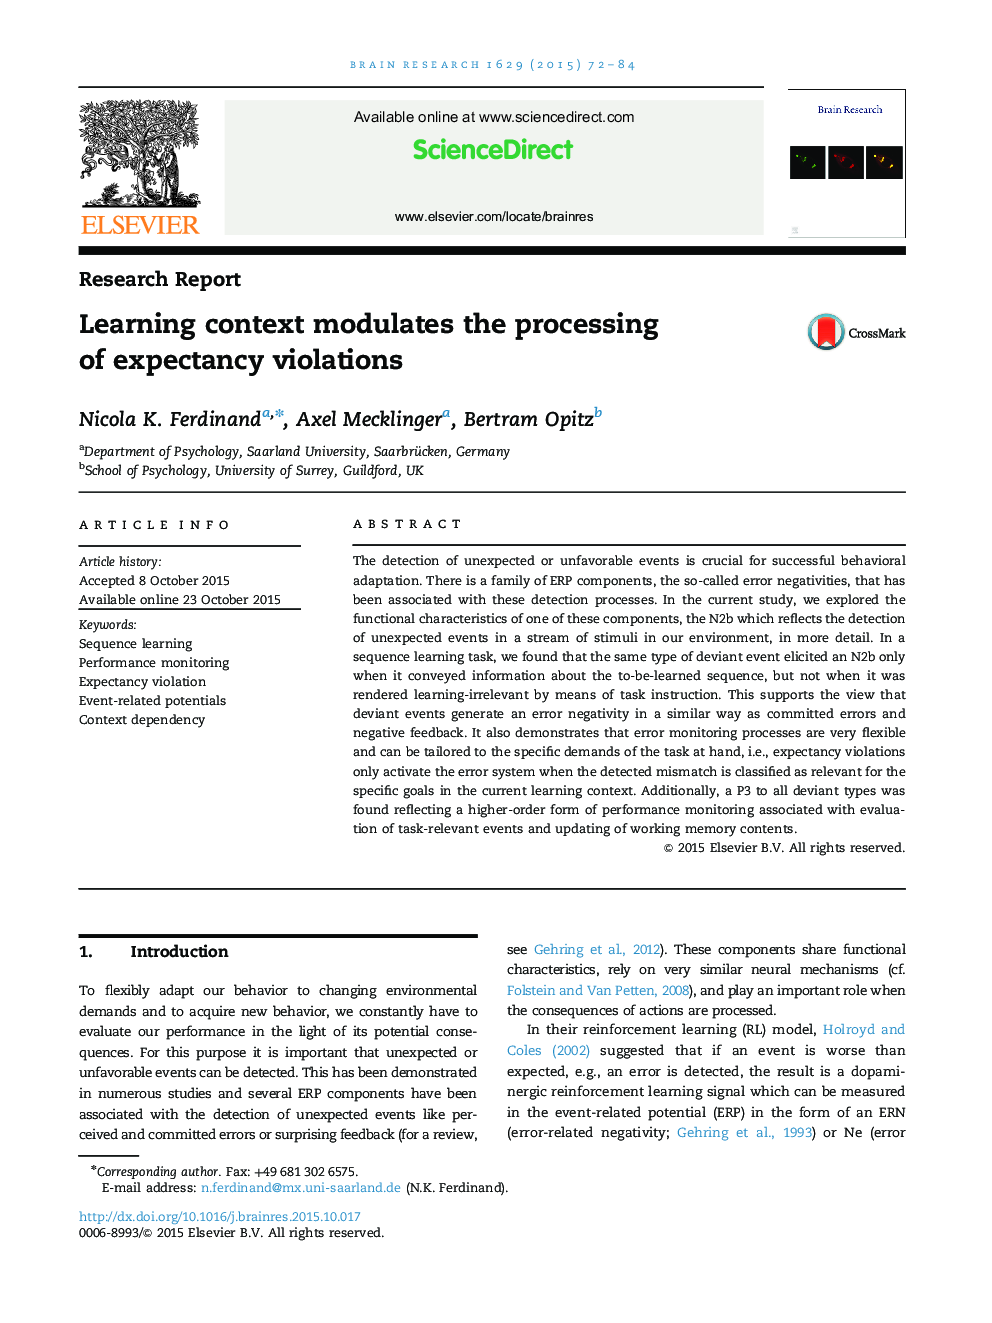 Research ReportLearning context modulates the processing of expectancy violations